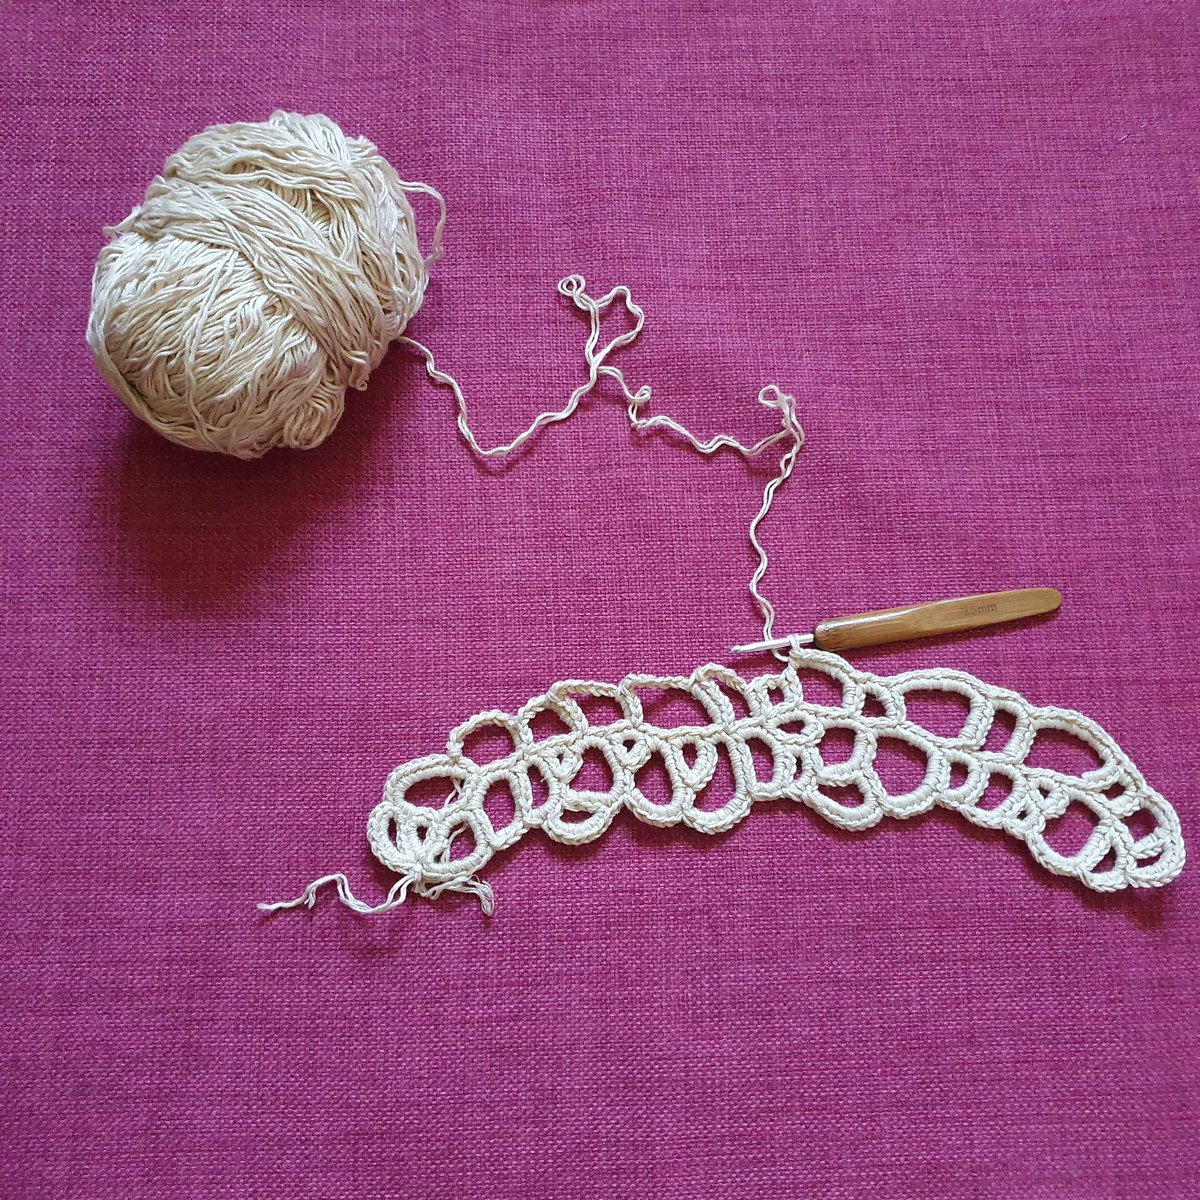 Kimberley has been practicing a new free form style of crochet using natural fibers, bamboo and cotton, hoping to turn it turn it into an item of clothing.